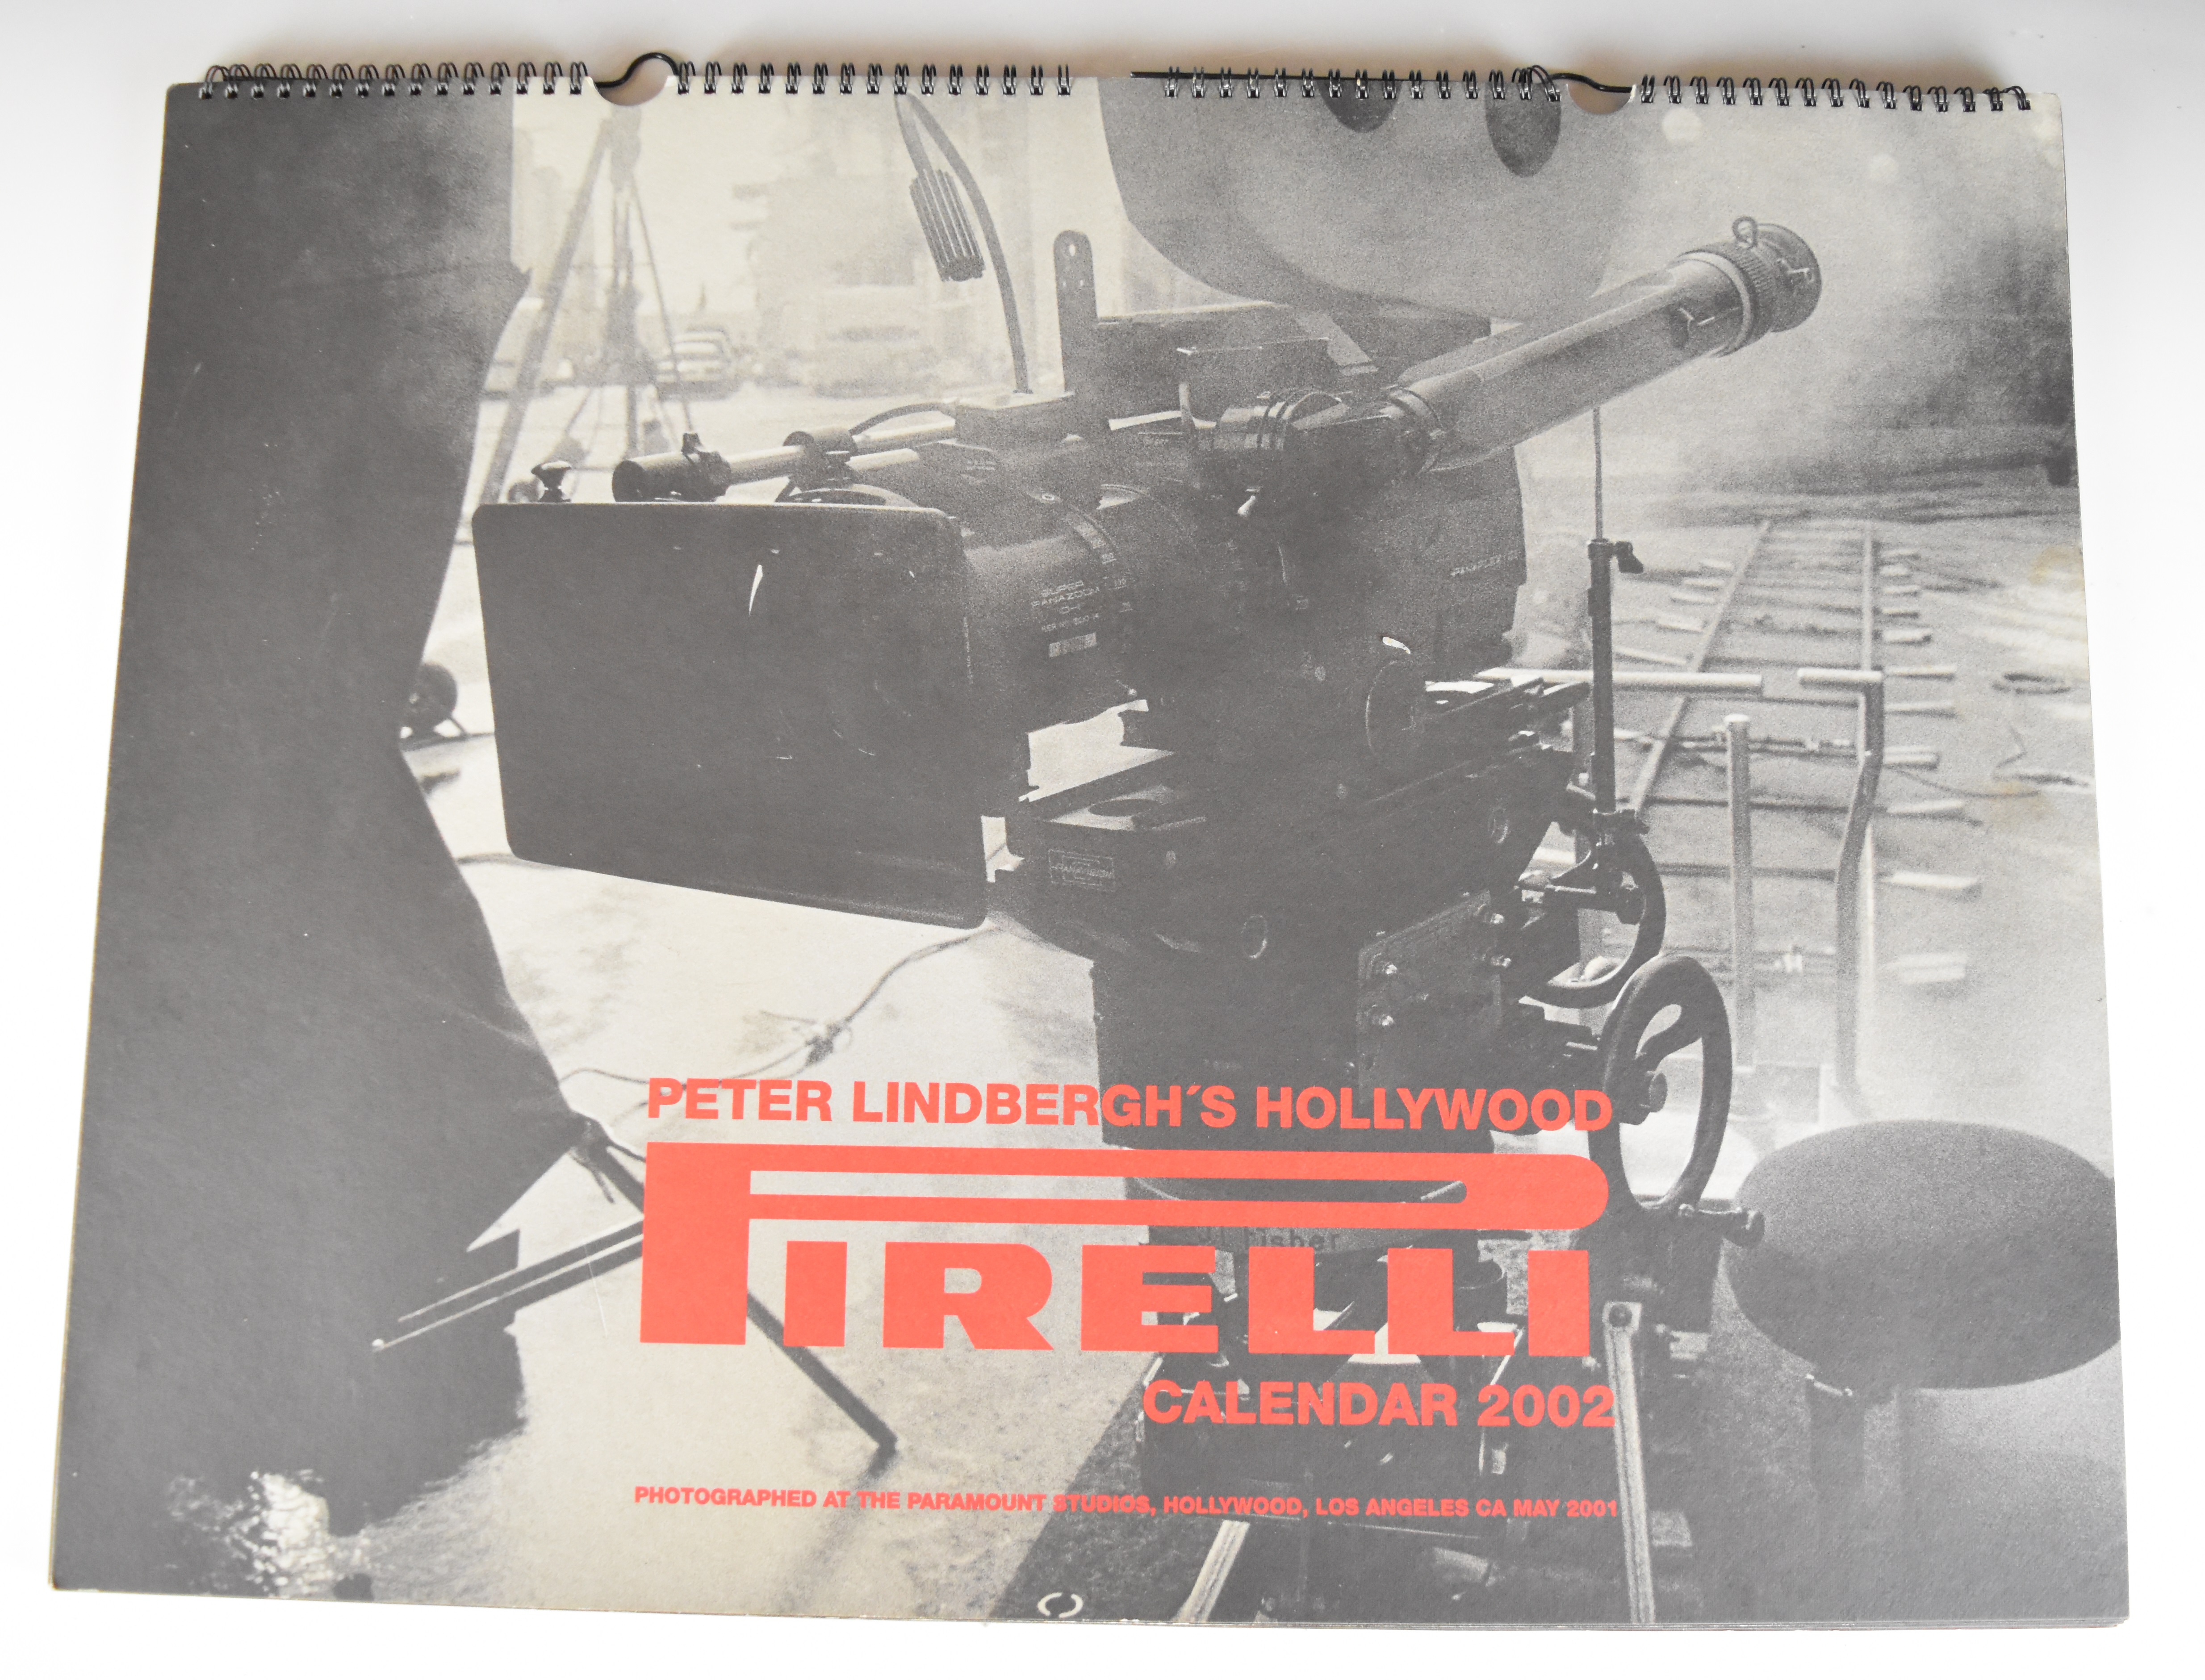 Pirelli 2002 Hollywood calendar by Peter Lindbergh, plastic back board for old style calendars, - Image 7 of 7